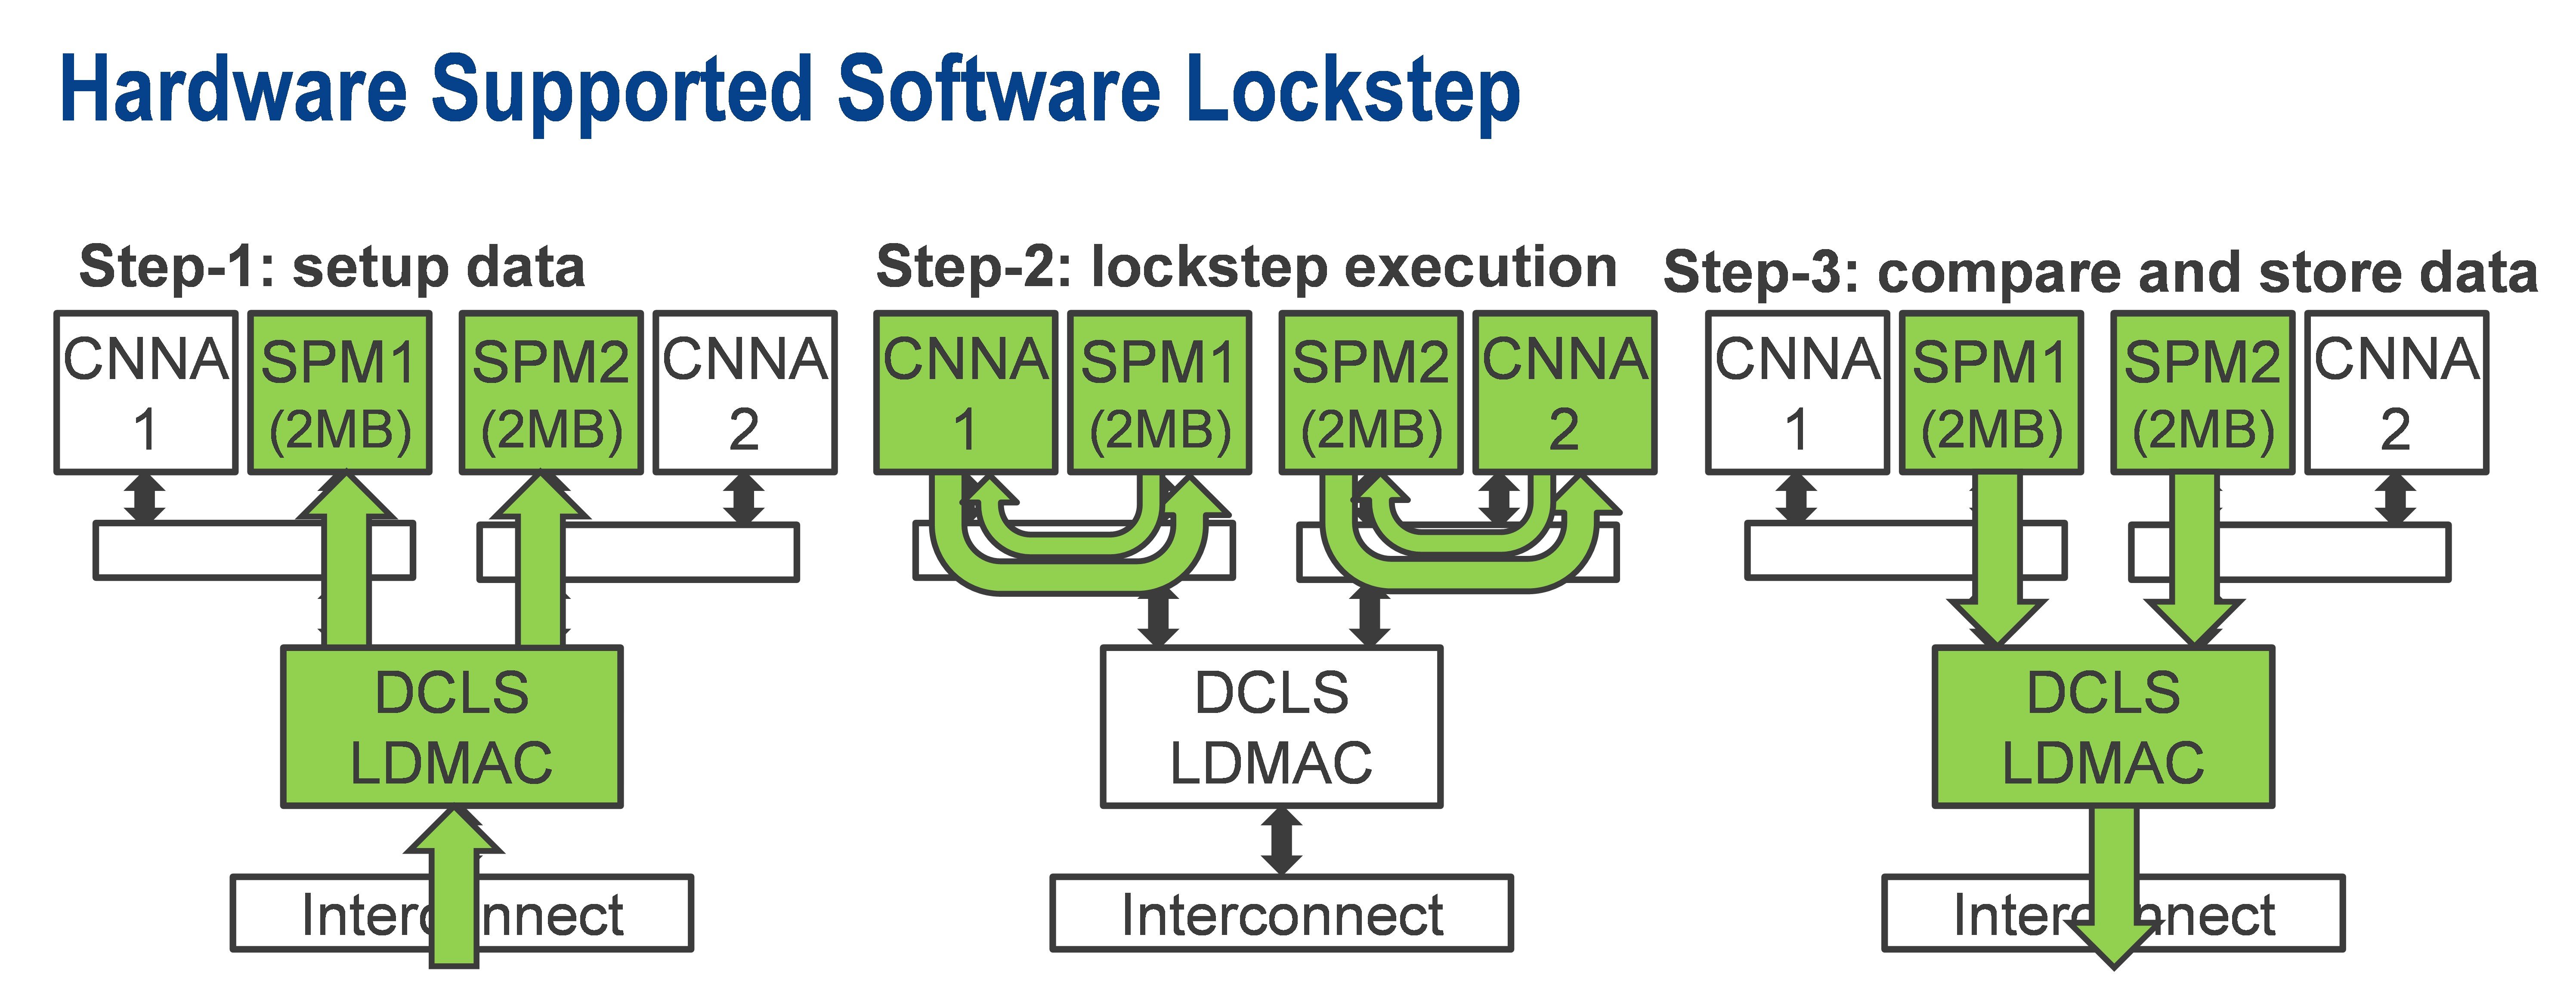 hardware-supported-software-lockstep